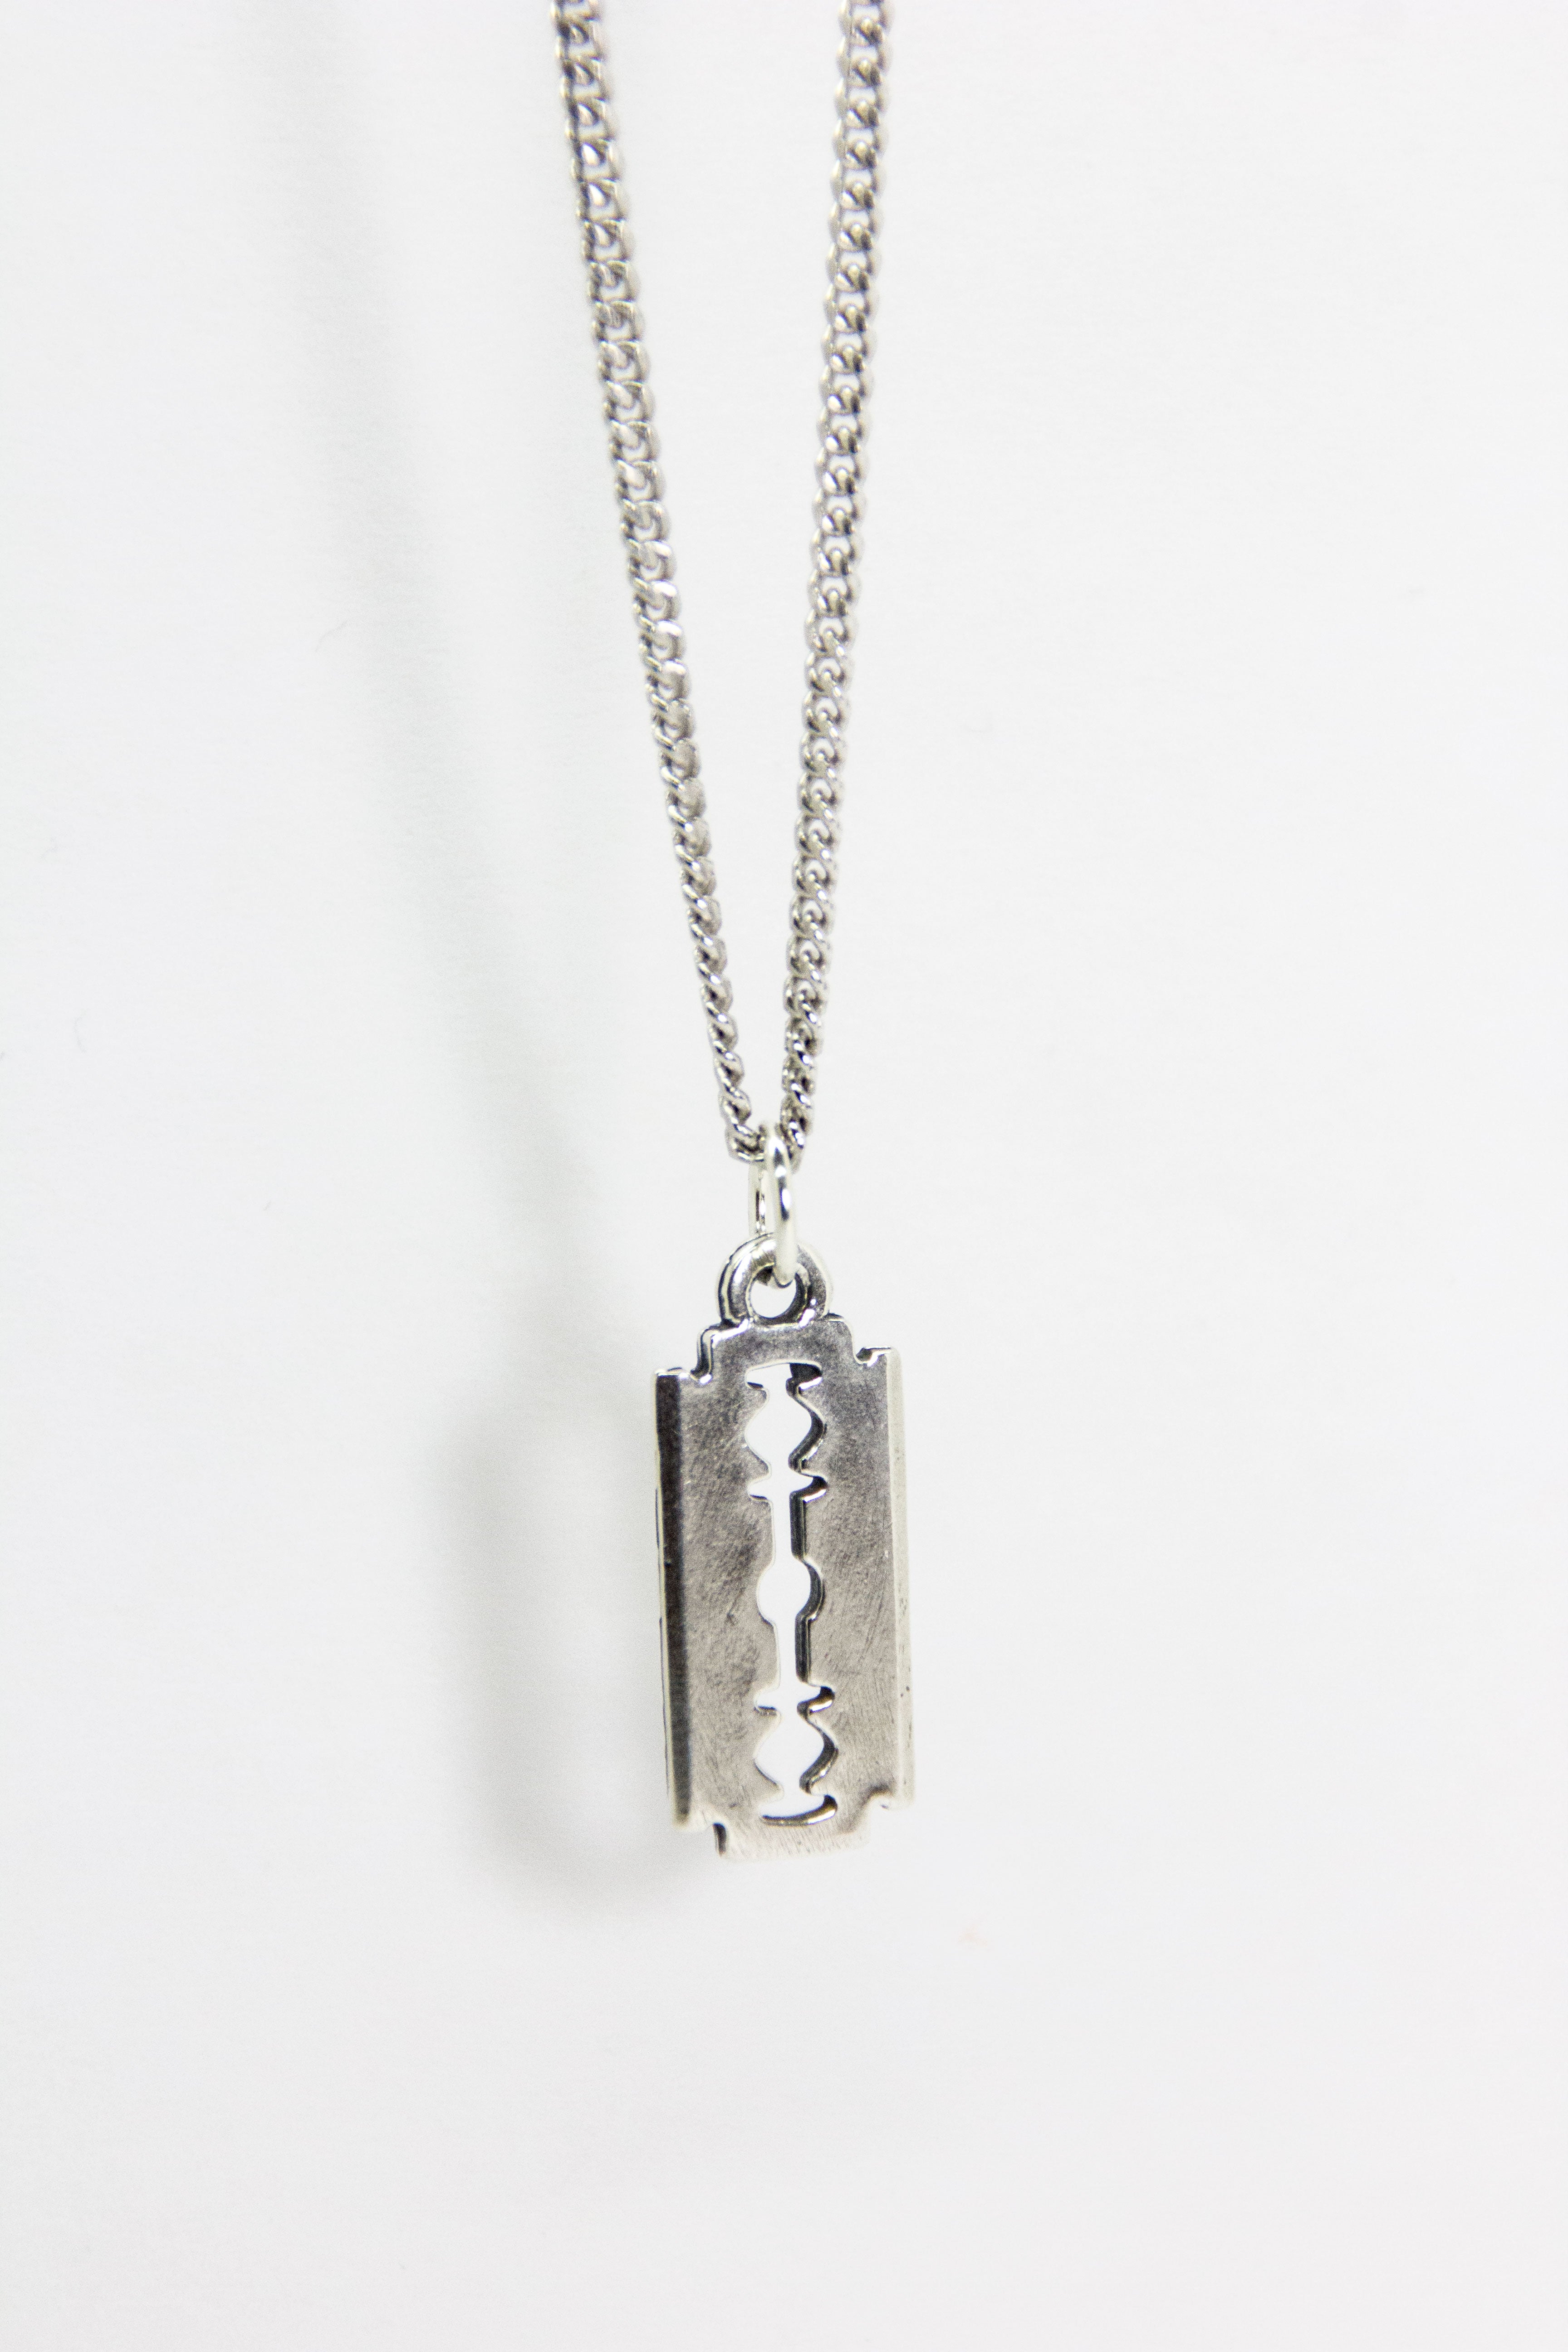 An “Addicted” silver razor blade necklace with diamonds